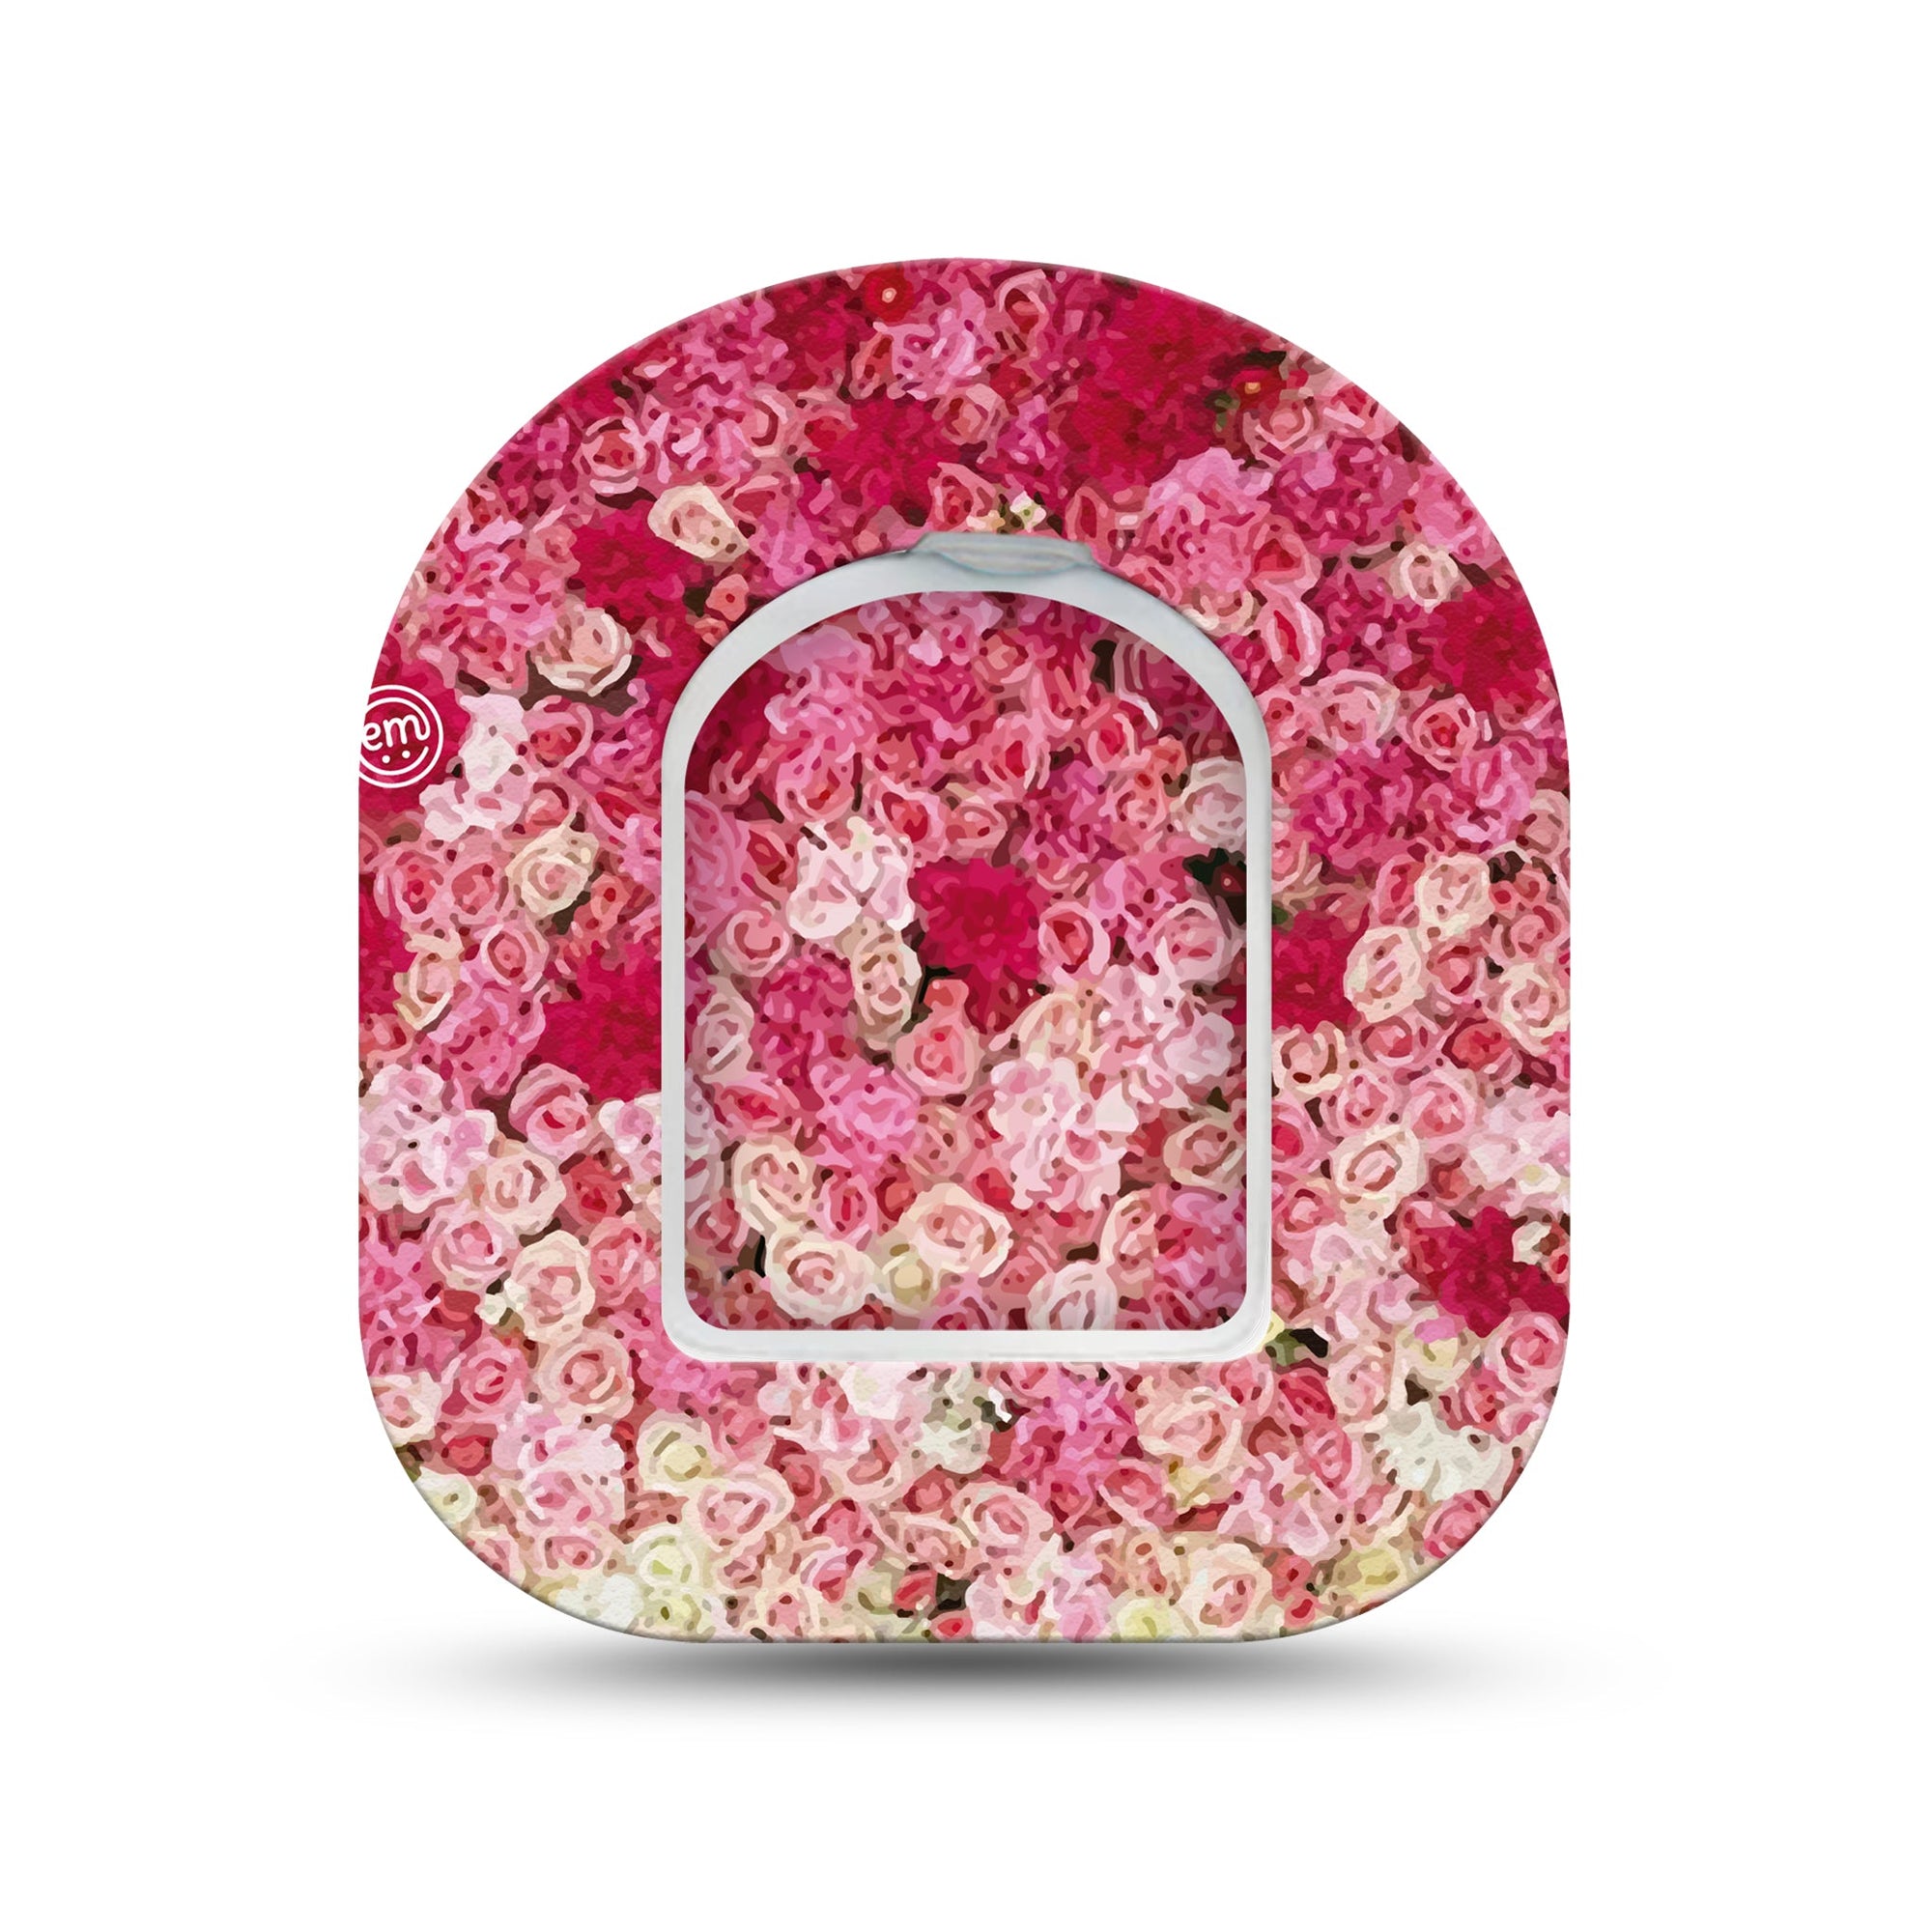 ExpressionMed Flower Wall Pod Mini Tape Single Sticker and Single Tape, Garden Inspiration Adhesive Patch Pump Design